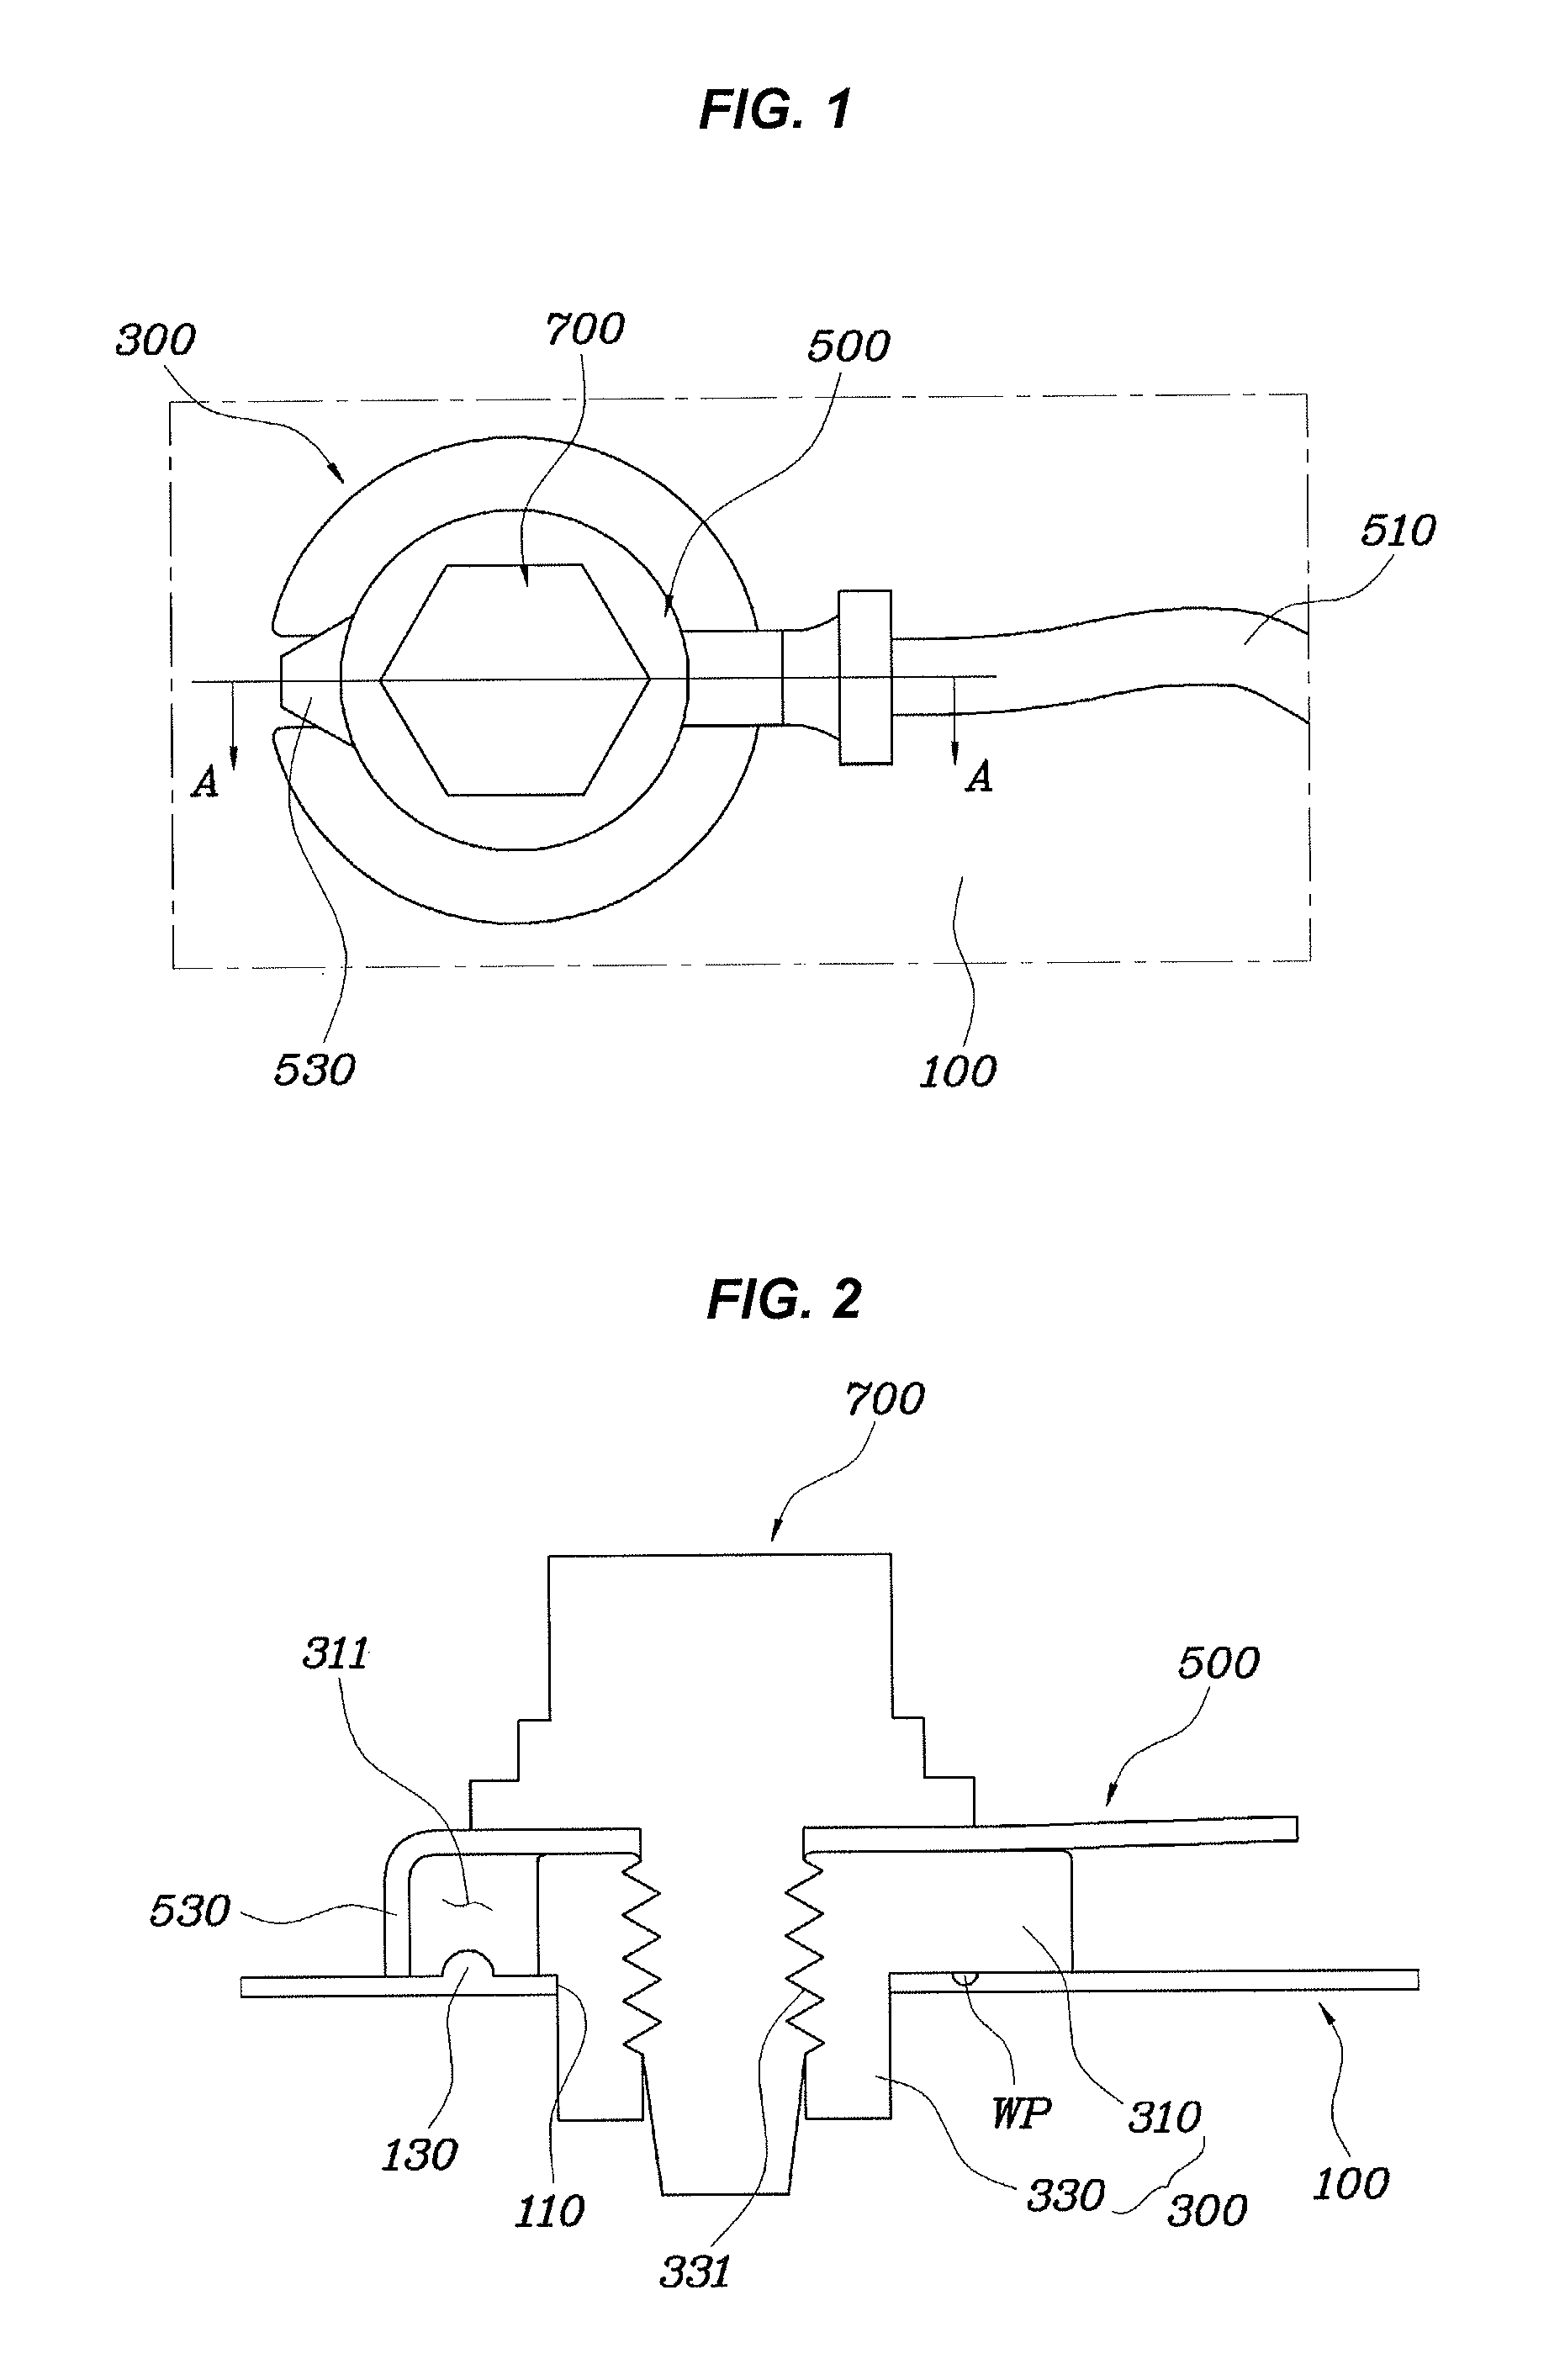 Earth apparatus of vehicle